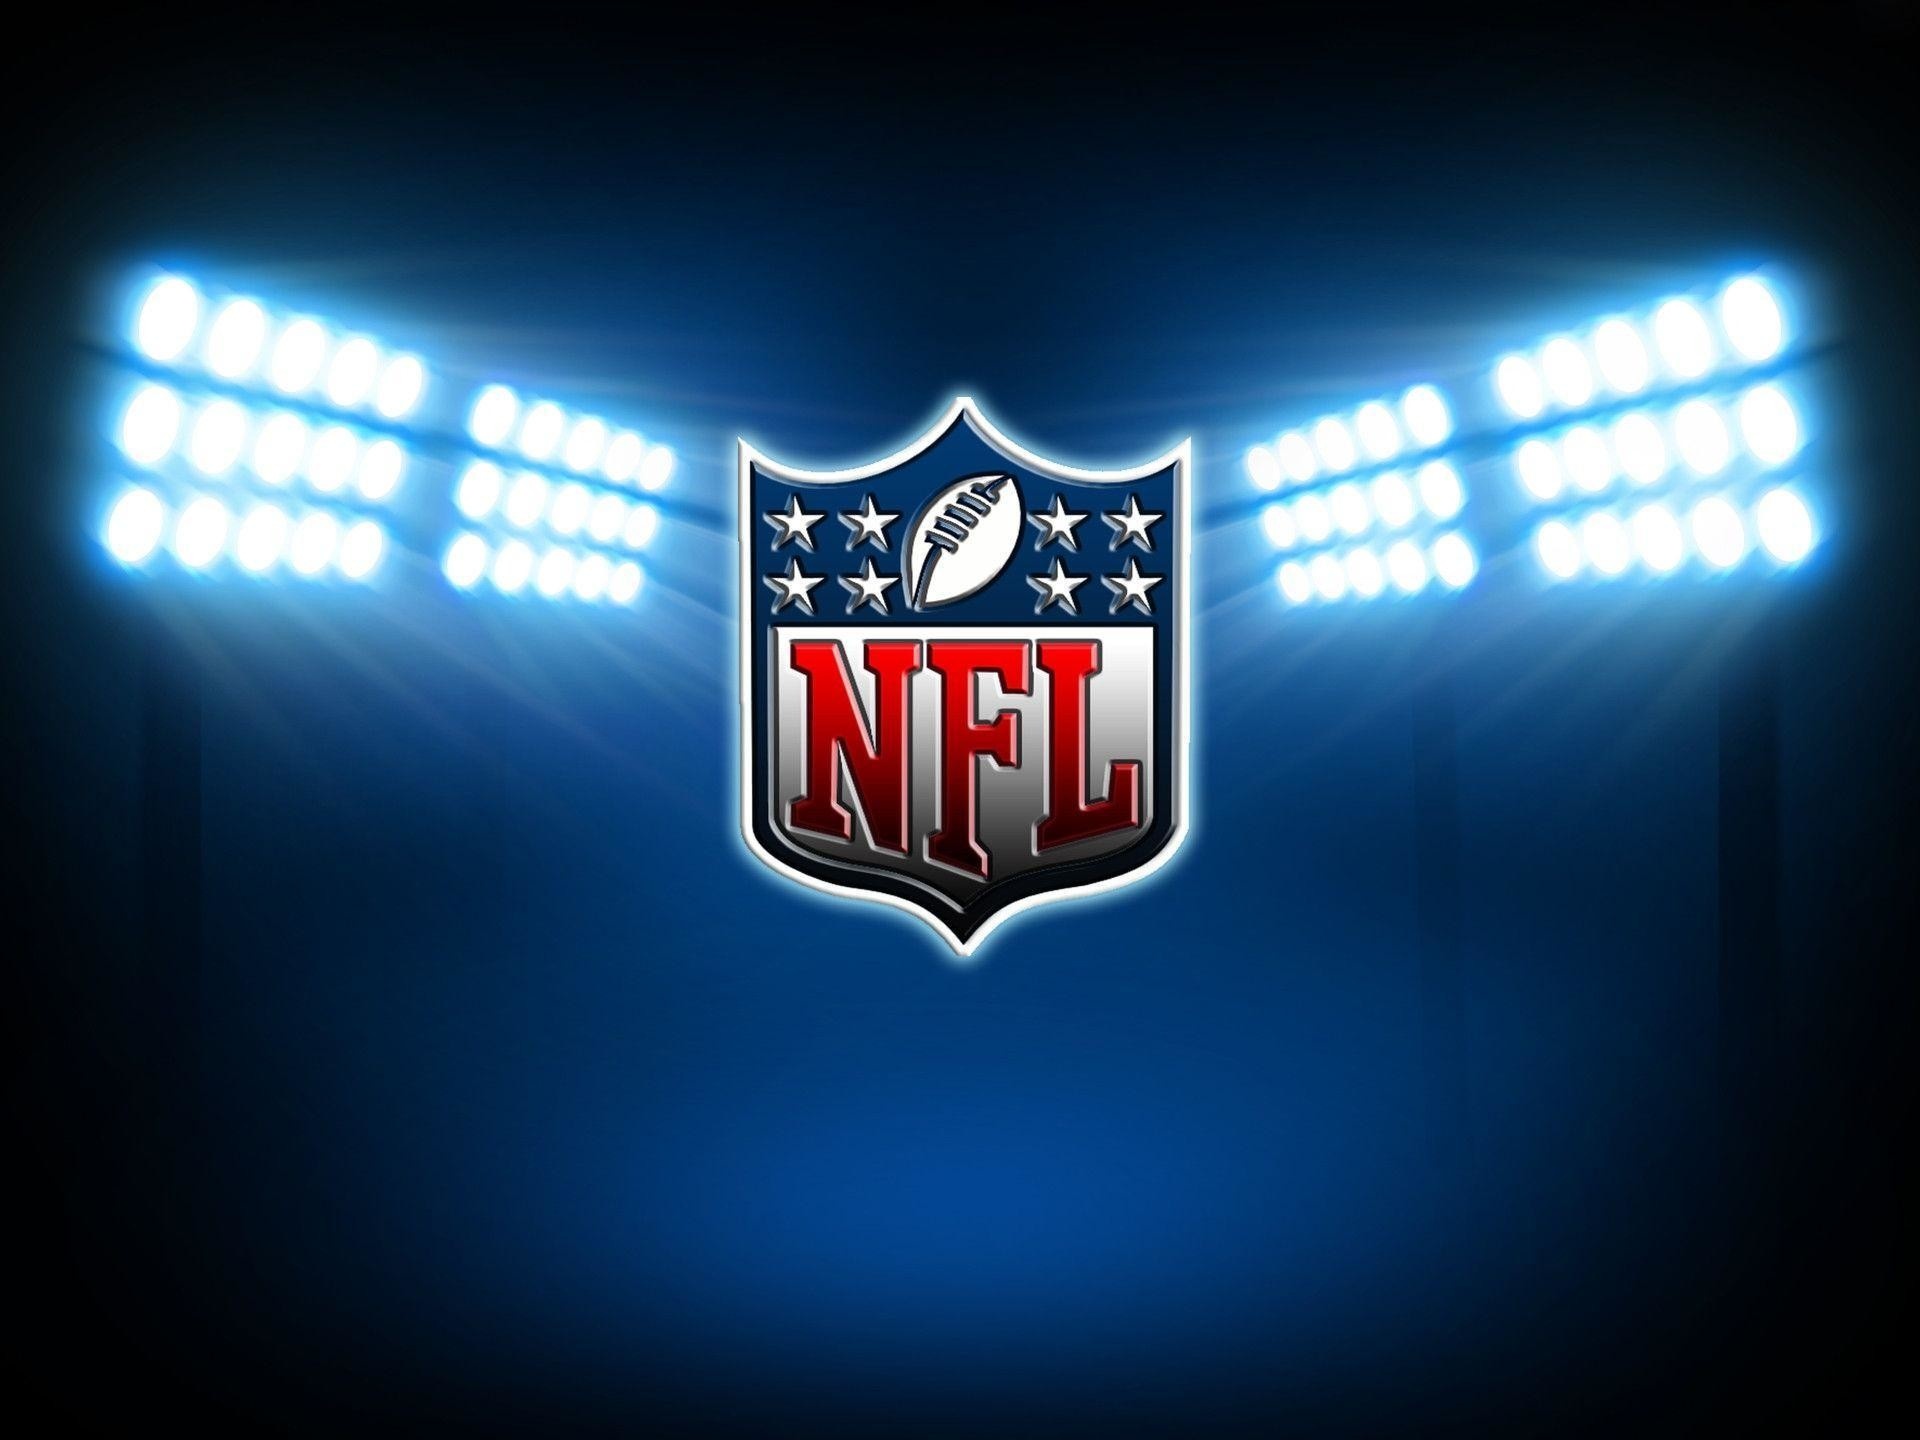 NFL background images, Football frenzy, Vibrant team colors, Fanatical support, 1920x1440 HD Desktop